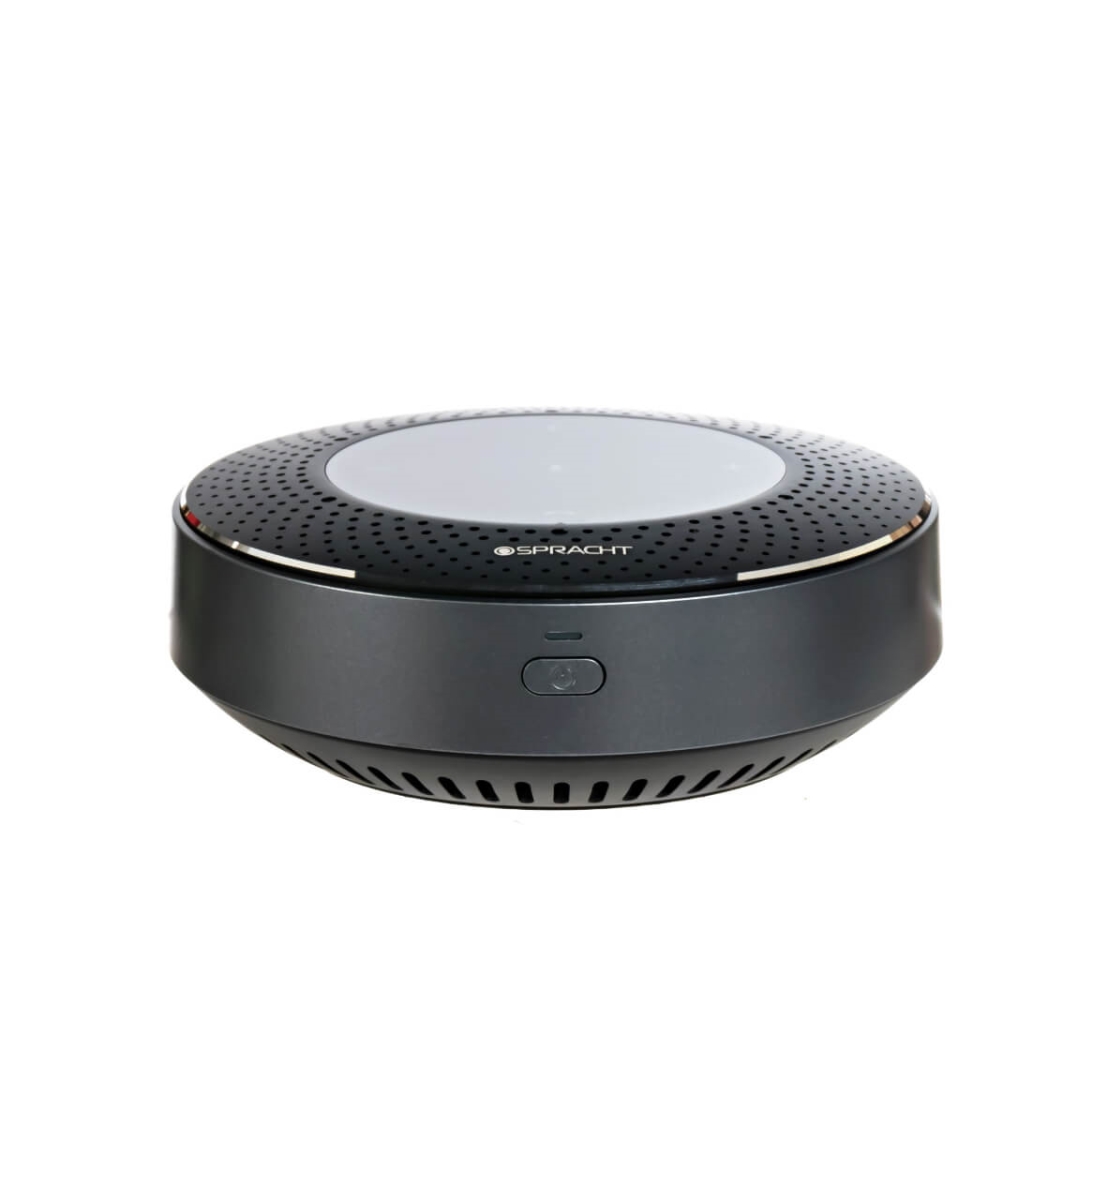 Picture of Spracht MCP4010 Desktop & Travel Speaker with Bluetooth & USB Connectivity